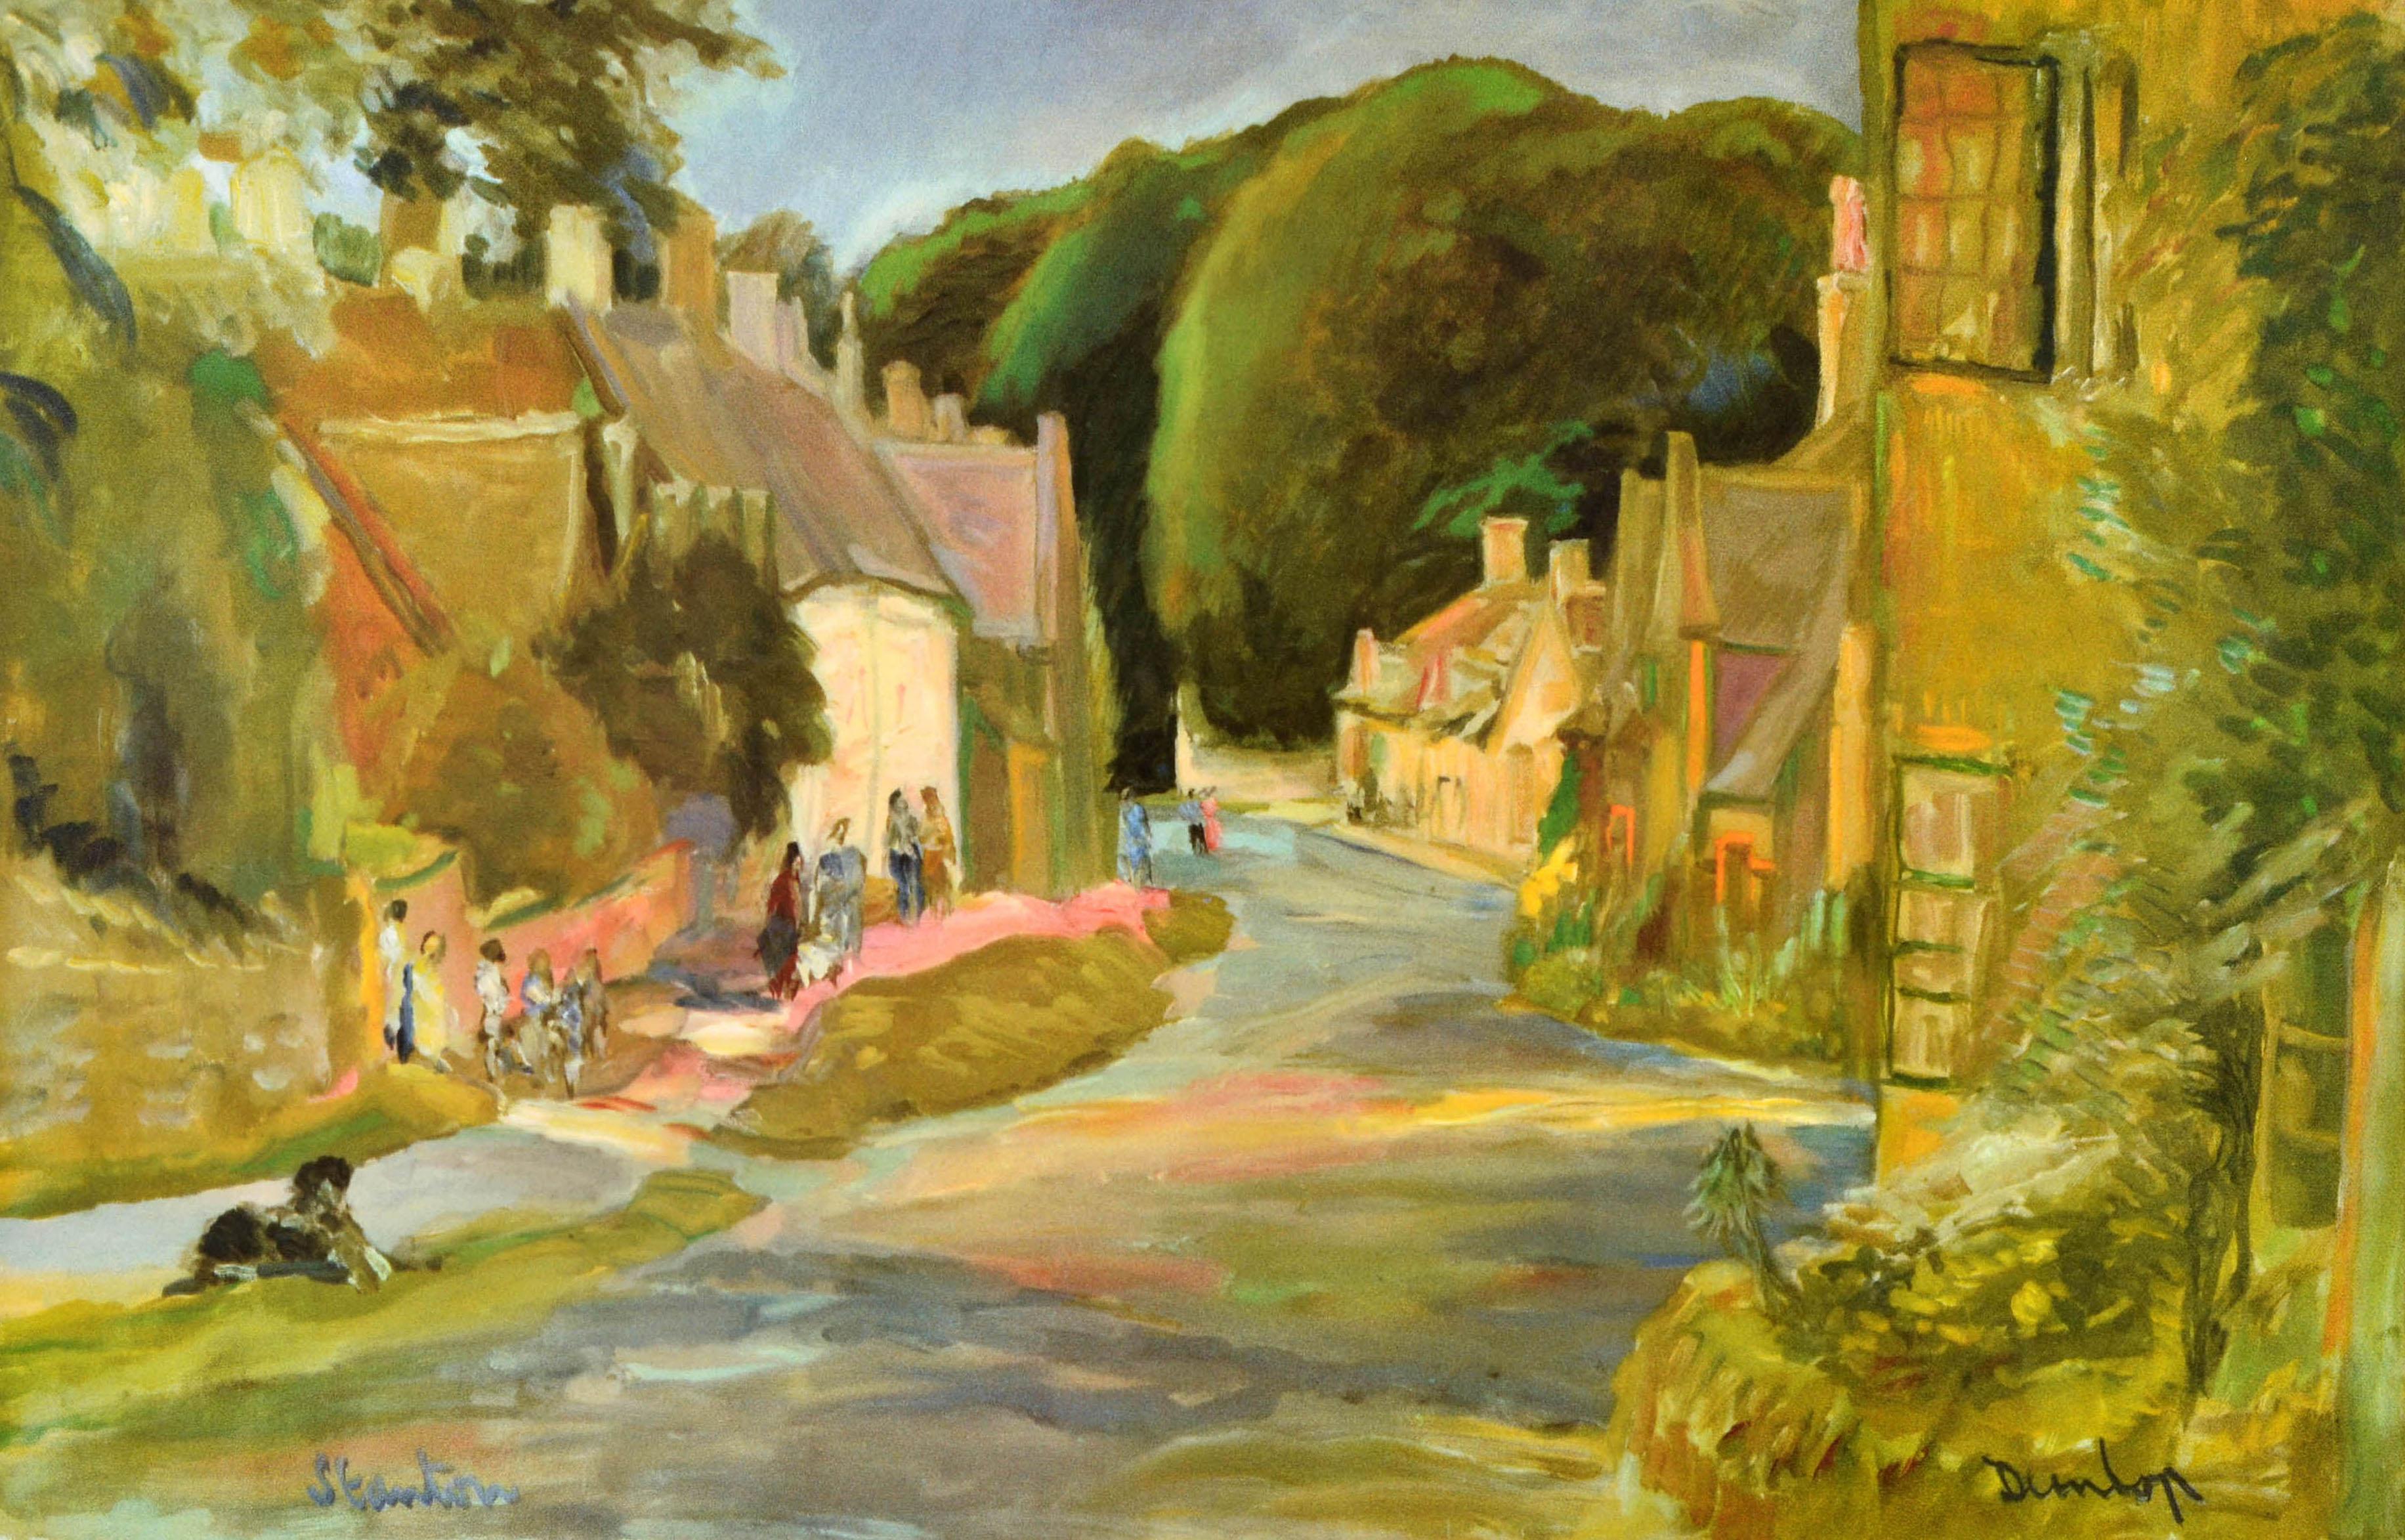 Original Vintage General Post Office Poster Stanton Cotswolds Correct Address - Print by Ronald Ossory Dunlop